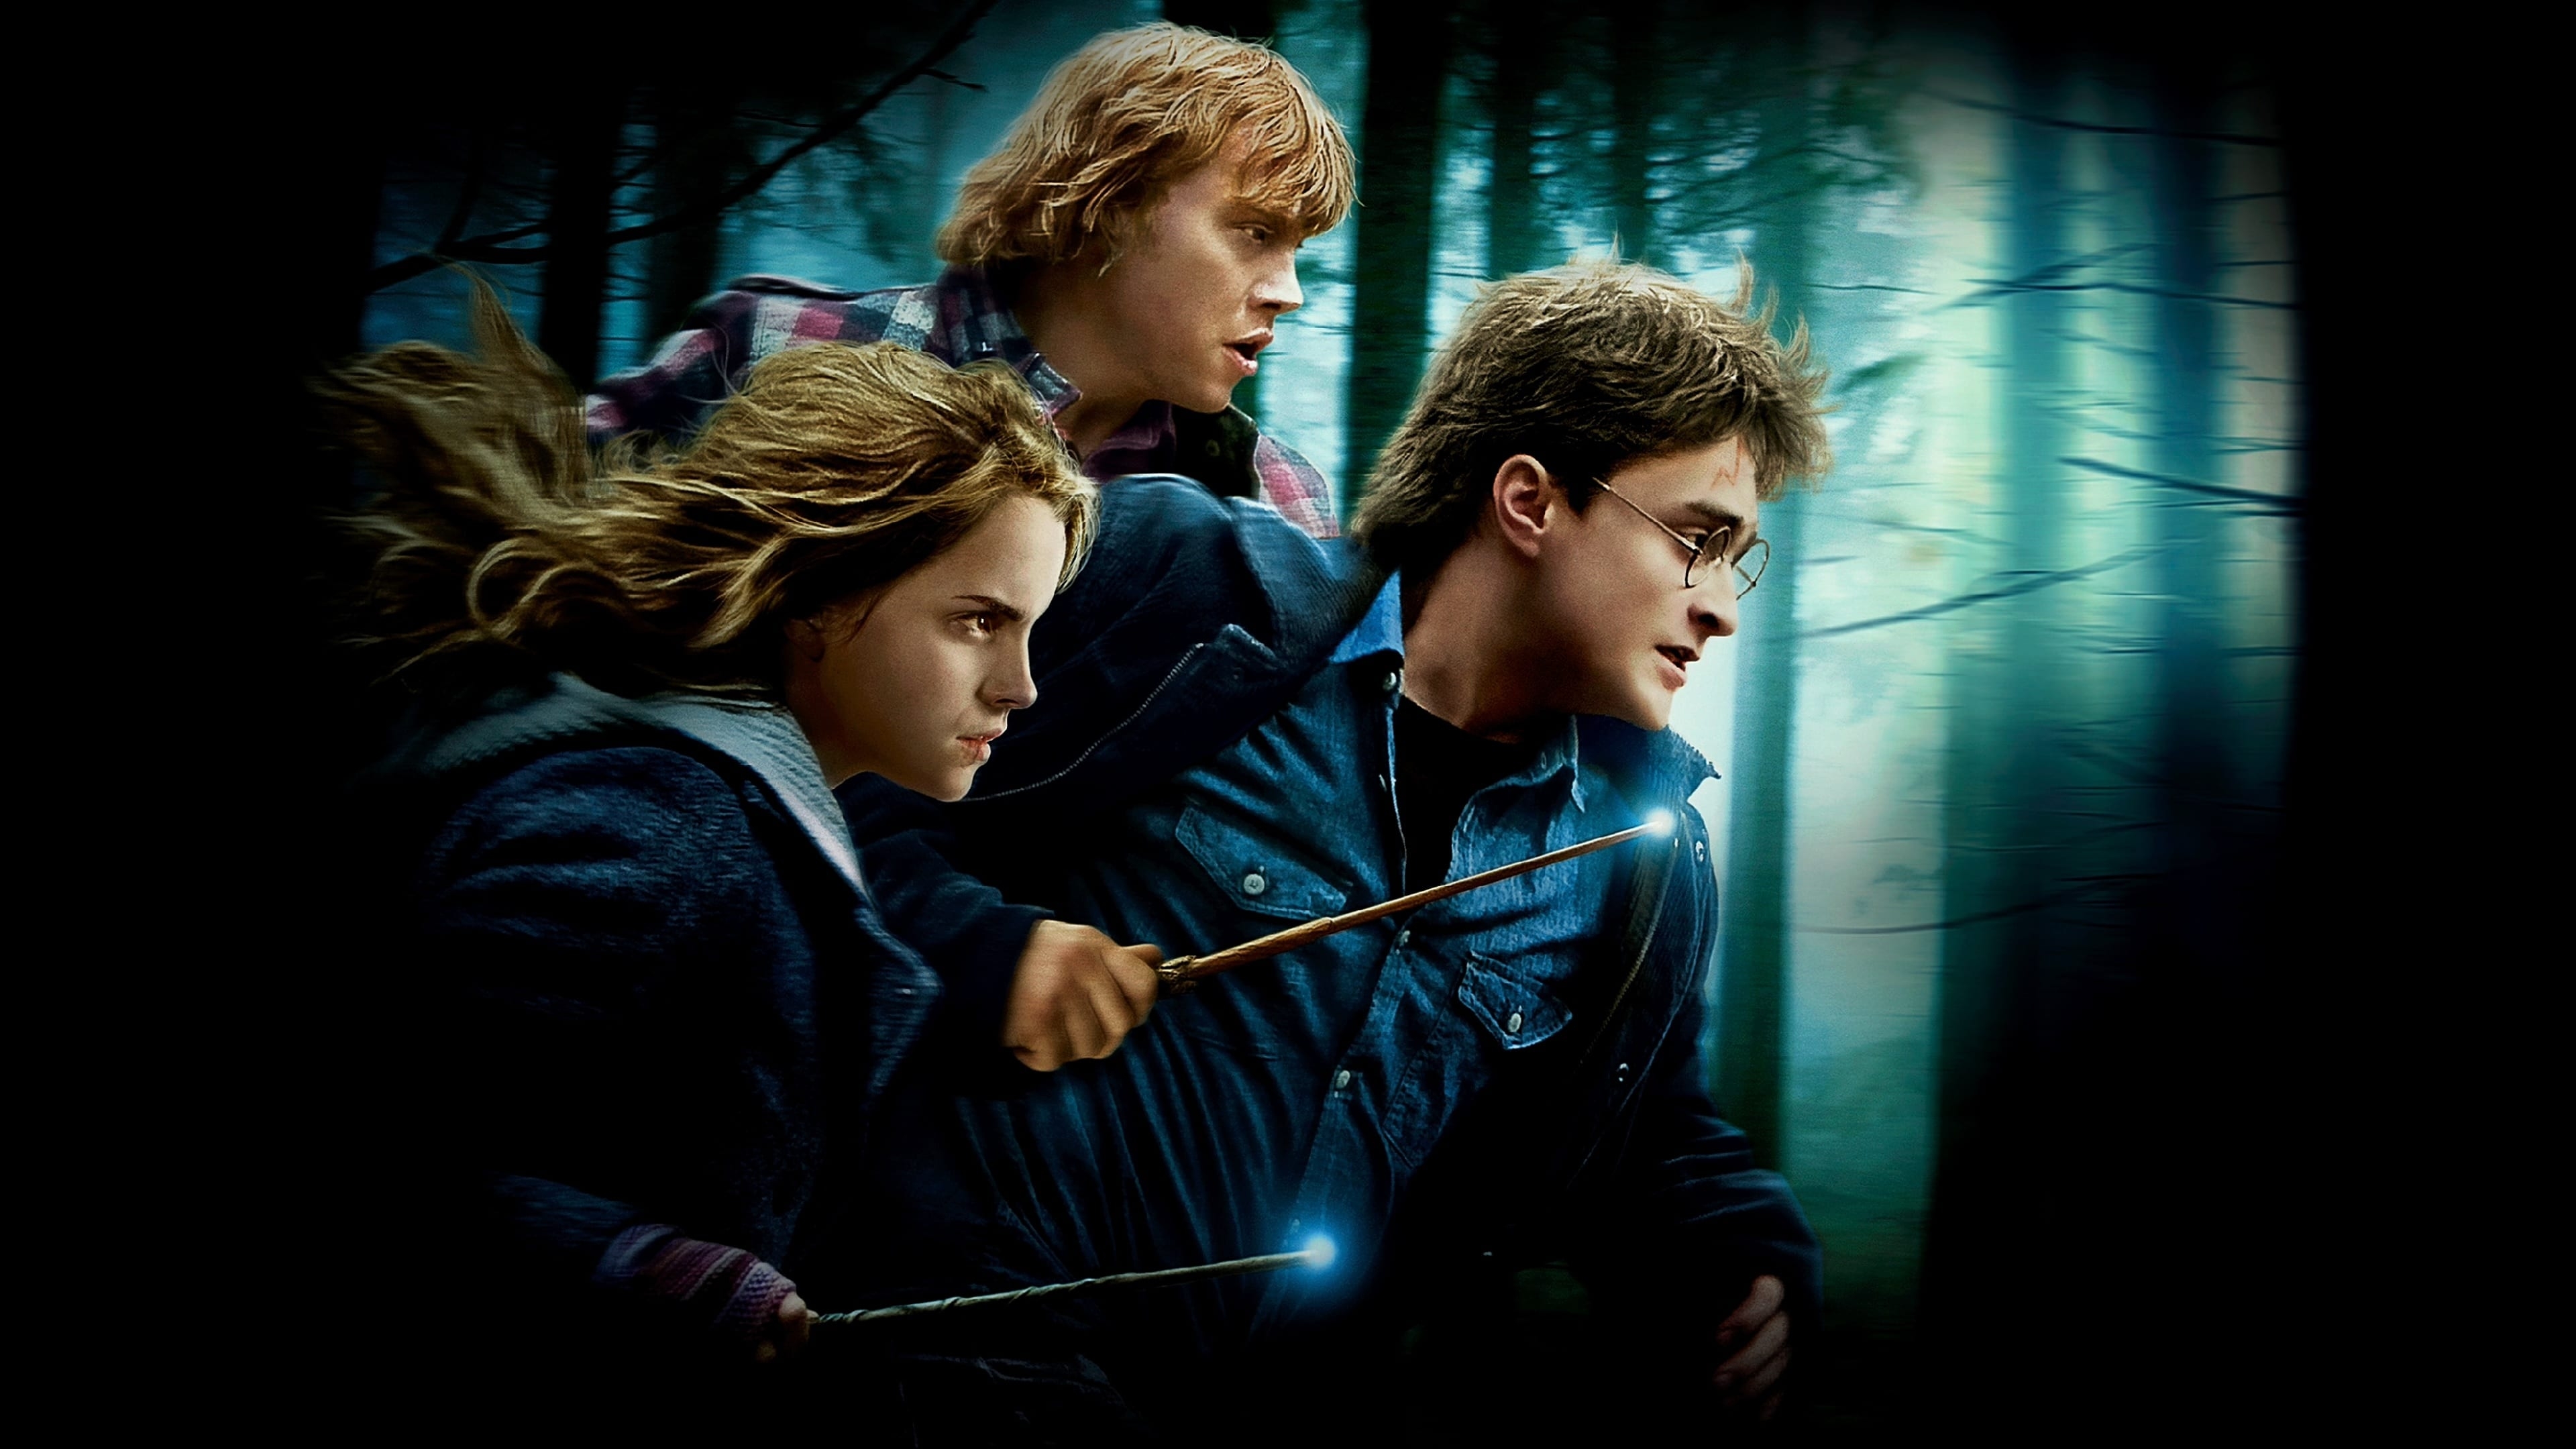 HD wallpaper, Ron Weasley, Daniel Radcliffe As Harry Potter, Harry Potter And The Deathly Hallows Part 1, Emma Watson As Hermione Granger